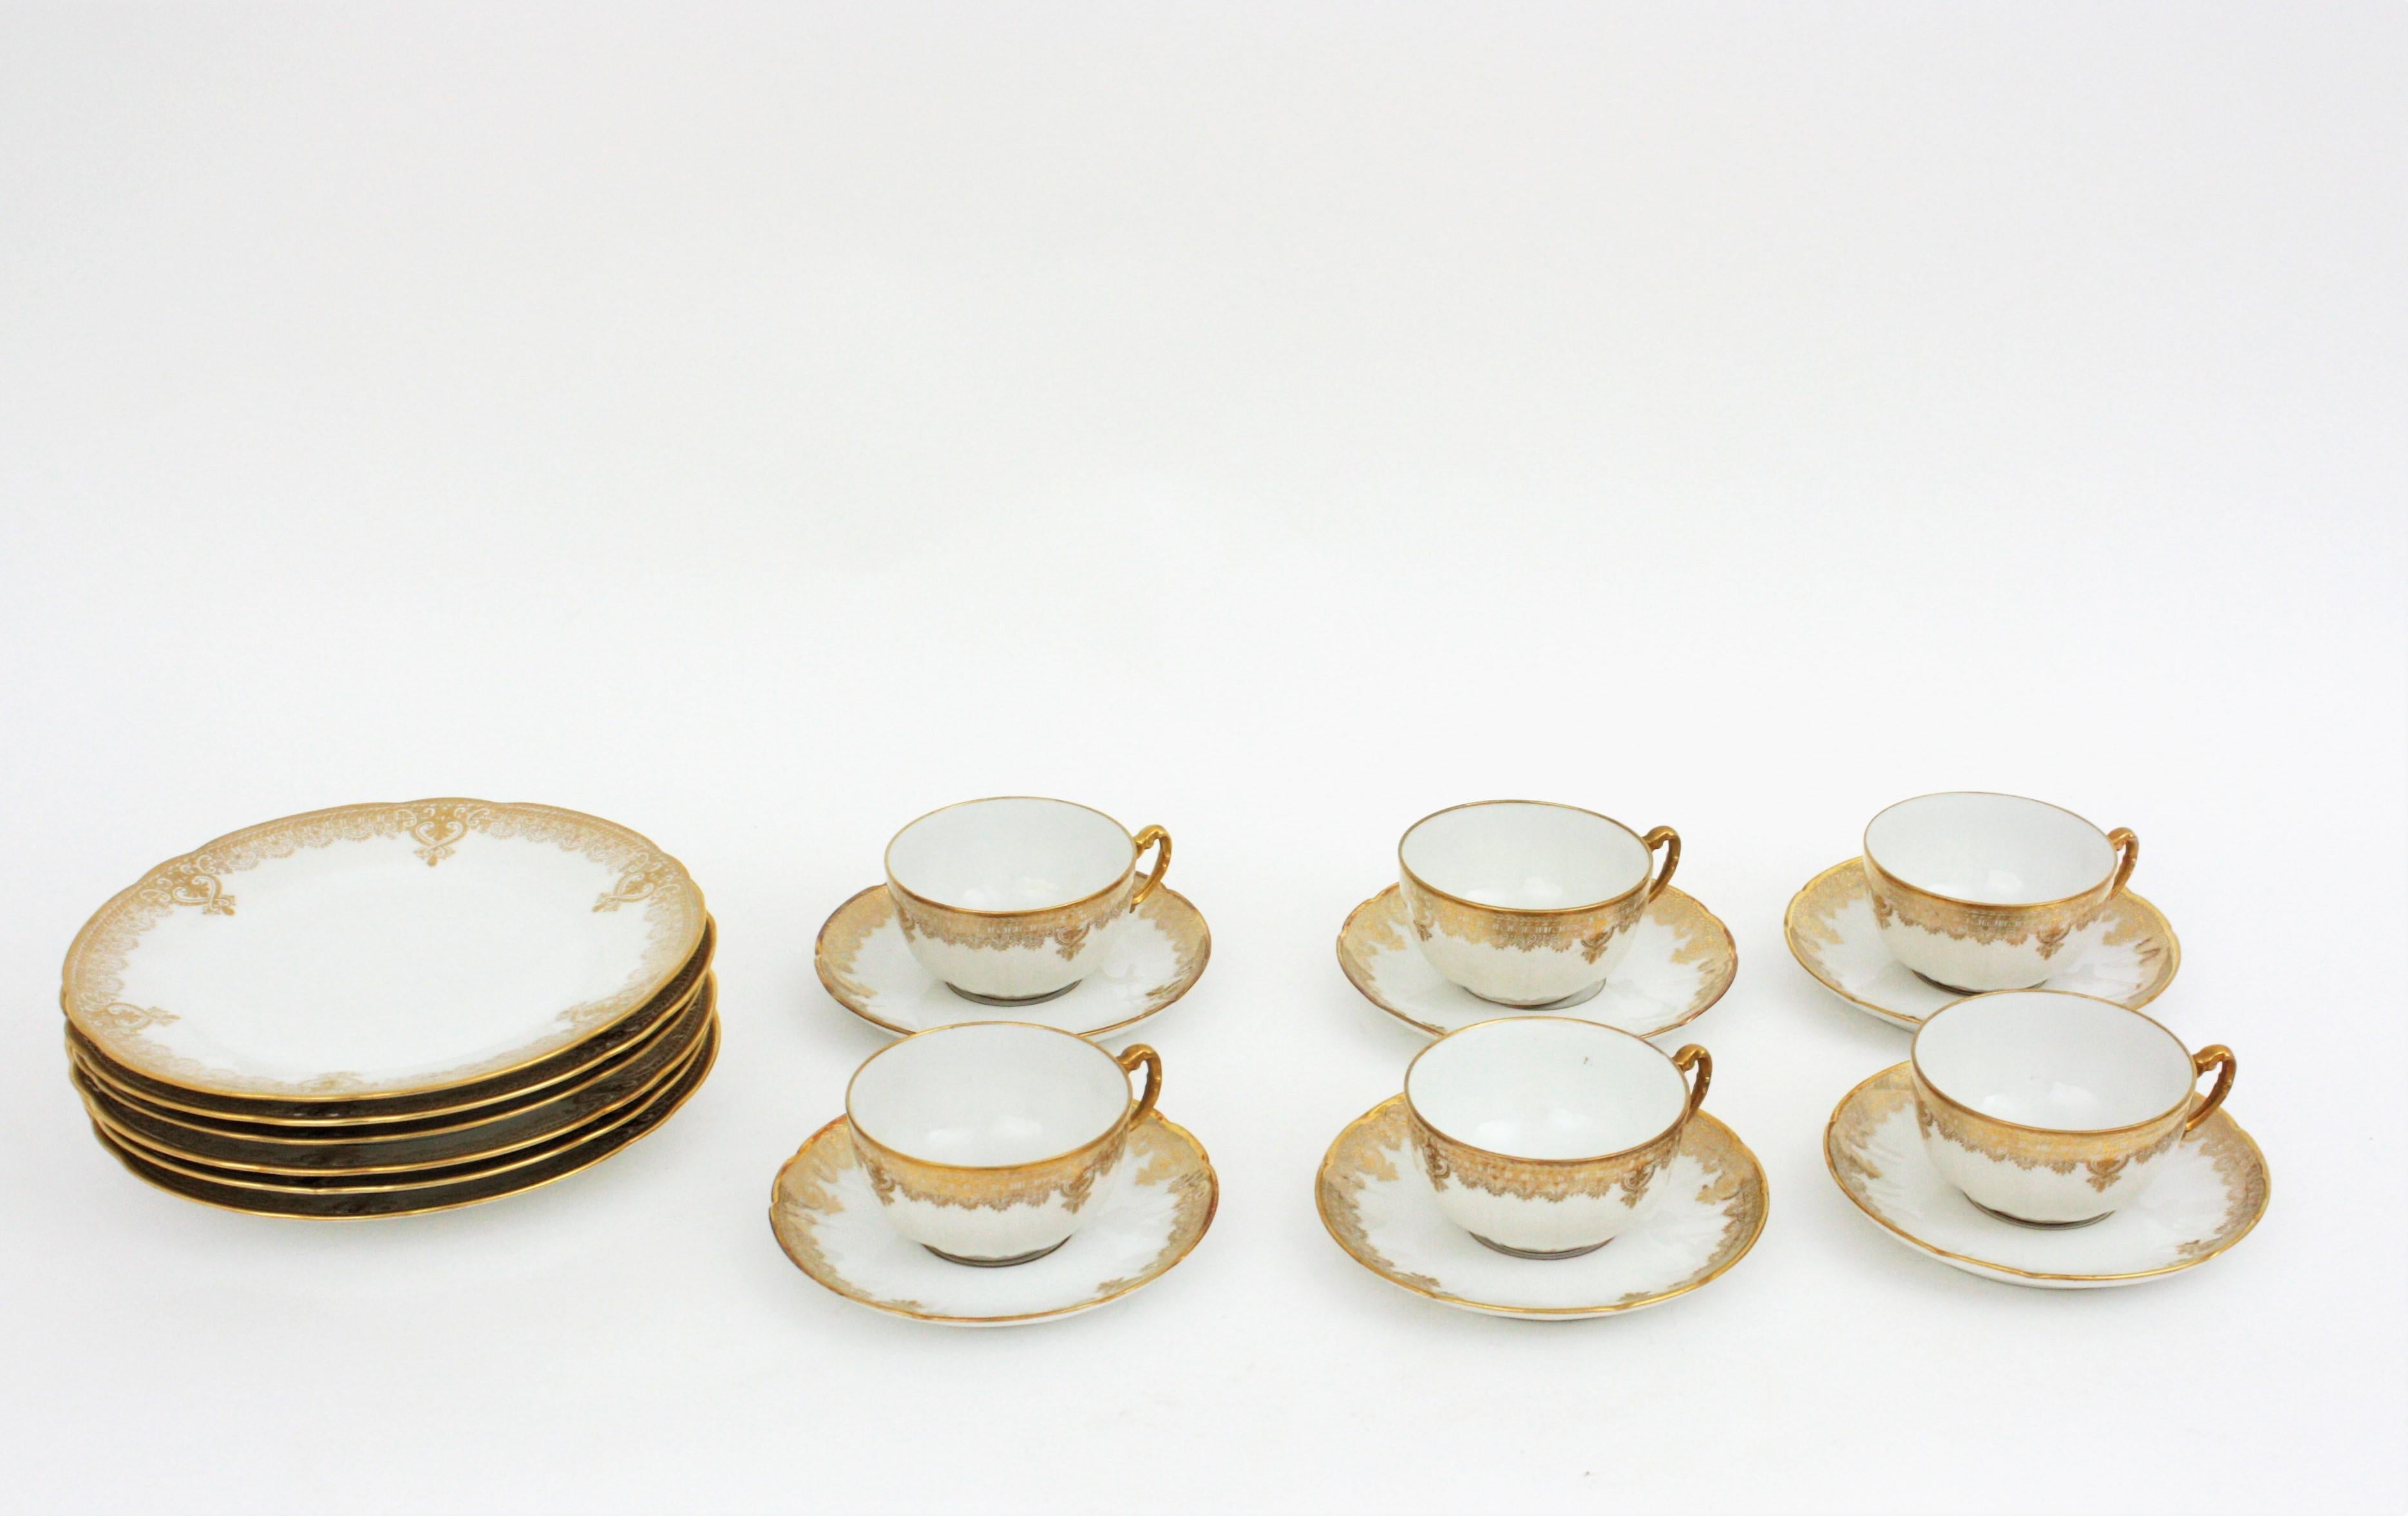 Limoges Porcelain gold gilt coffee set + bread and butter plates for six. France, 1930s.
The set is comprised by 6 coffee or tea cups, 6 saucers and 6 bread and butter / dessert plates.
On sale as a set
Measures:
Cups: 11 cm at the widest point x 5